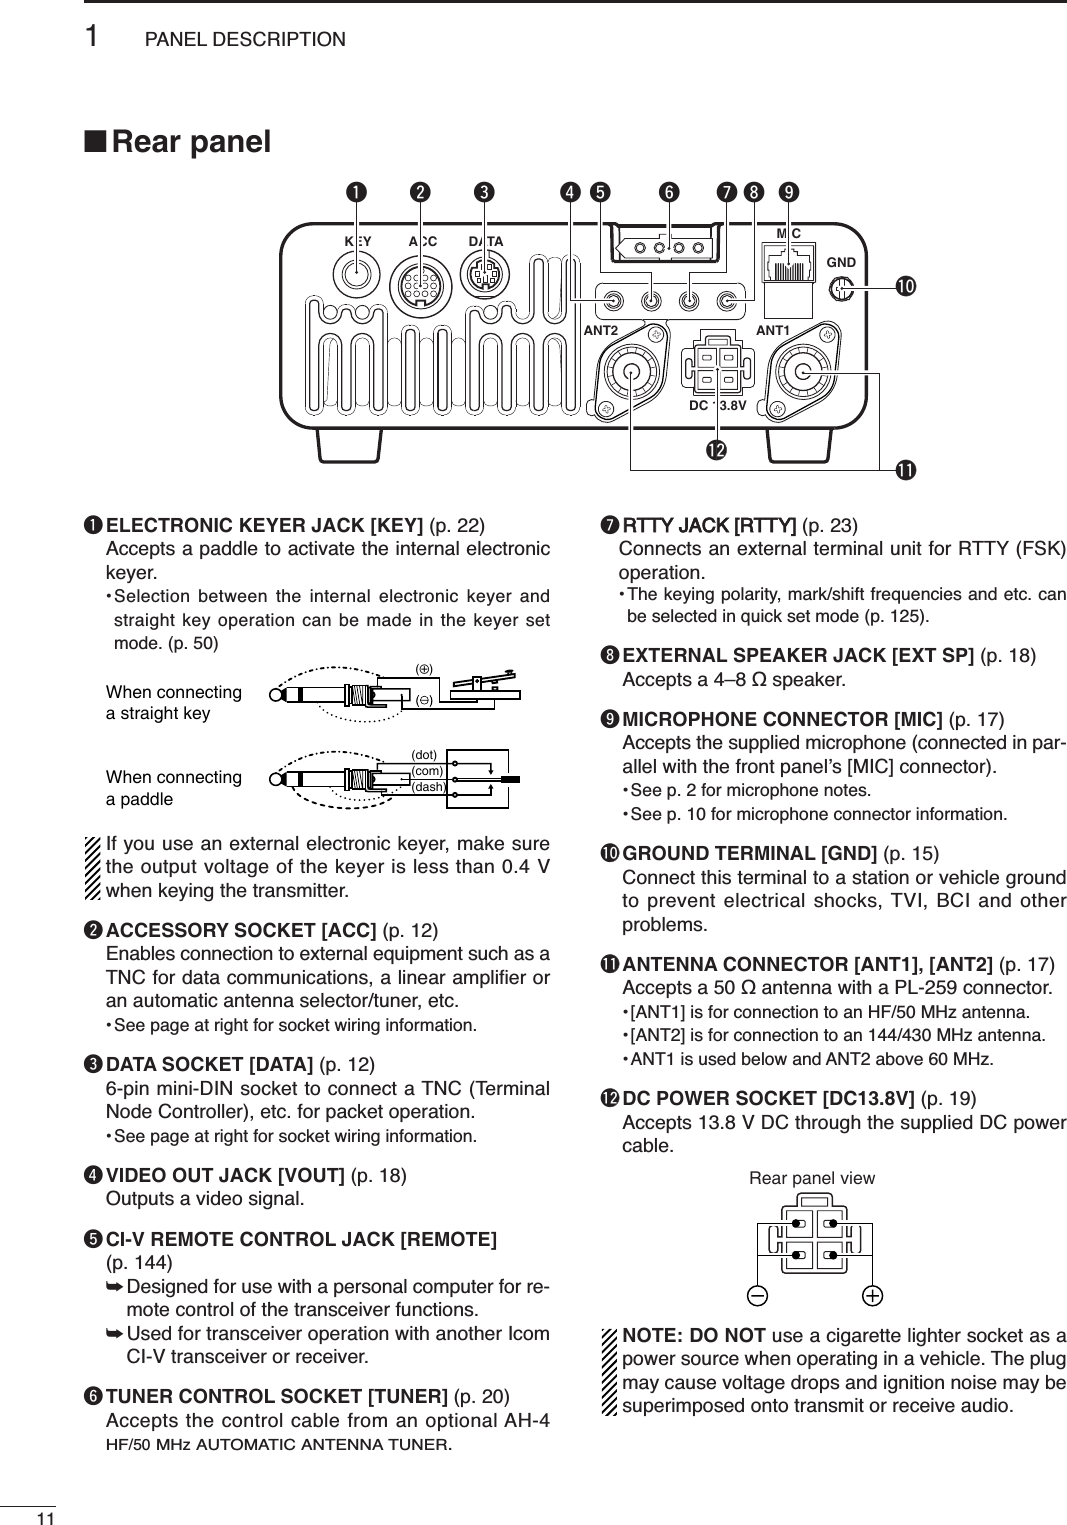 111PANEL DESCRIPTIONqELECTRONIC KEYER JACK [KEY] (p. 22)Accepts a paddle to activate the internal electronickeyer.•Selection between the internal electronic keyer andstraight key operation can be made in the keyer setmode. (p. 50)If you use an external electronic keyer, make surethe output voltage of the keyer is less than 0.4 Vwhen keying the transmitter.wACCESSORY SOCKET [ACC] (p. 12)Enables connection to external equipment such as aTNC for data communications, a linear ampliﬁer oran automatic antenna selector/tuner, etc.•See page at right for socket wiring information.eDATA SOCKET [DATA] (p. 12)6-pin mini-DIN socket to connect a TNC (TerminalNode Controller), etc. for packet operation.•See page at right for socket wiring information.rVIDEO OUT JACK [VOUT] (p. 18)Outputs a video signal.tCI-V REMOTE CONTROL JACK [REMOTE](p. 144)➥Designed for use with a personal computer for re-mote control of the transceiver functions.➥Used for transceiver operation with another IcomCI-V transceiver or receiver.yTUNER CONTROL SOCKET [TUNER] (p. 20)Accepts the control cable from an optional AH-4HF/50MHzAUTOMATIC ANTENNA TUNER.uRTTY JACK [RTTY] (p. 23)Connects an external terminal unit for RTTY (FSK)operation.•The keying polarity, mark/shift frequencies and etc. canbe selected in quick set mode (p. 125).iEXTERNAL SPEAKER JACK [EXT SP] (p. 18)Accepts a 4–8 speaker.oMICROPHONE CONNECTOR [MIC] (p. 17)Accepts the supplied microphone (connected in par-allel with the front panel’s [MIC] connector).•See p. 2 for microphone notes.•See p. 10 for microphone connector information.!0 GROUND TERMINAL [GND] (p. 15)Connect this terminal to a station or vehicle groundto prevent electrical shocks, TVI, BCI and otherproblems.!1 ANTENNA CONNECTOR [ANT1], [ANT2] (p. 17)Accepts a 50 antenna with a PL-259 connector.•[ANT1] is for connection to an HF/50 MHz antenna.•[ANT2] is for connection to an 144/430 MHz antenna.•ANT1 is used below and ANT2 above 60 MHz.!2 DC POWER SOCKET [DC13.8V] (p. 19)Accepts 13.8 V DC through the supplied DC powercable.NOTE: DO NOT use a cigarette lighter socket as apower source when operating in a vehicle. The plugmay cause voltage drops and ignition noise may besuperimposed onto transmit or receive audio.Rear panel viewWhen connectinga straight keyWhen connectinga paddle(dot)(com)(dash)()KEY ACC DATA MICANT2 ANT1DC 13.8VGNDqwe yuirto!0!1!2■Rear panel